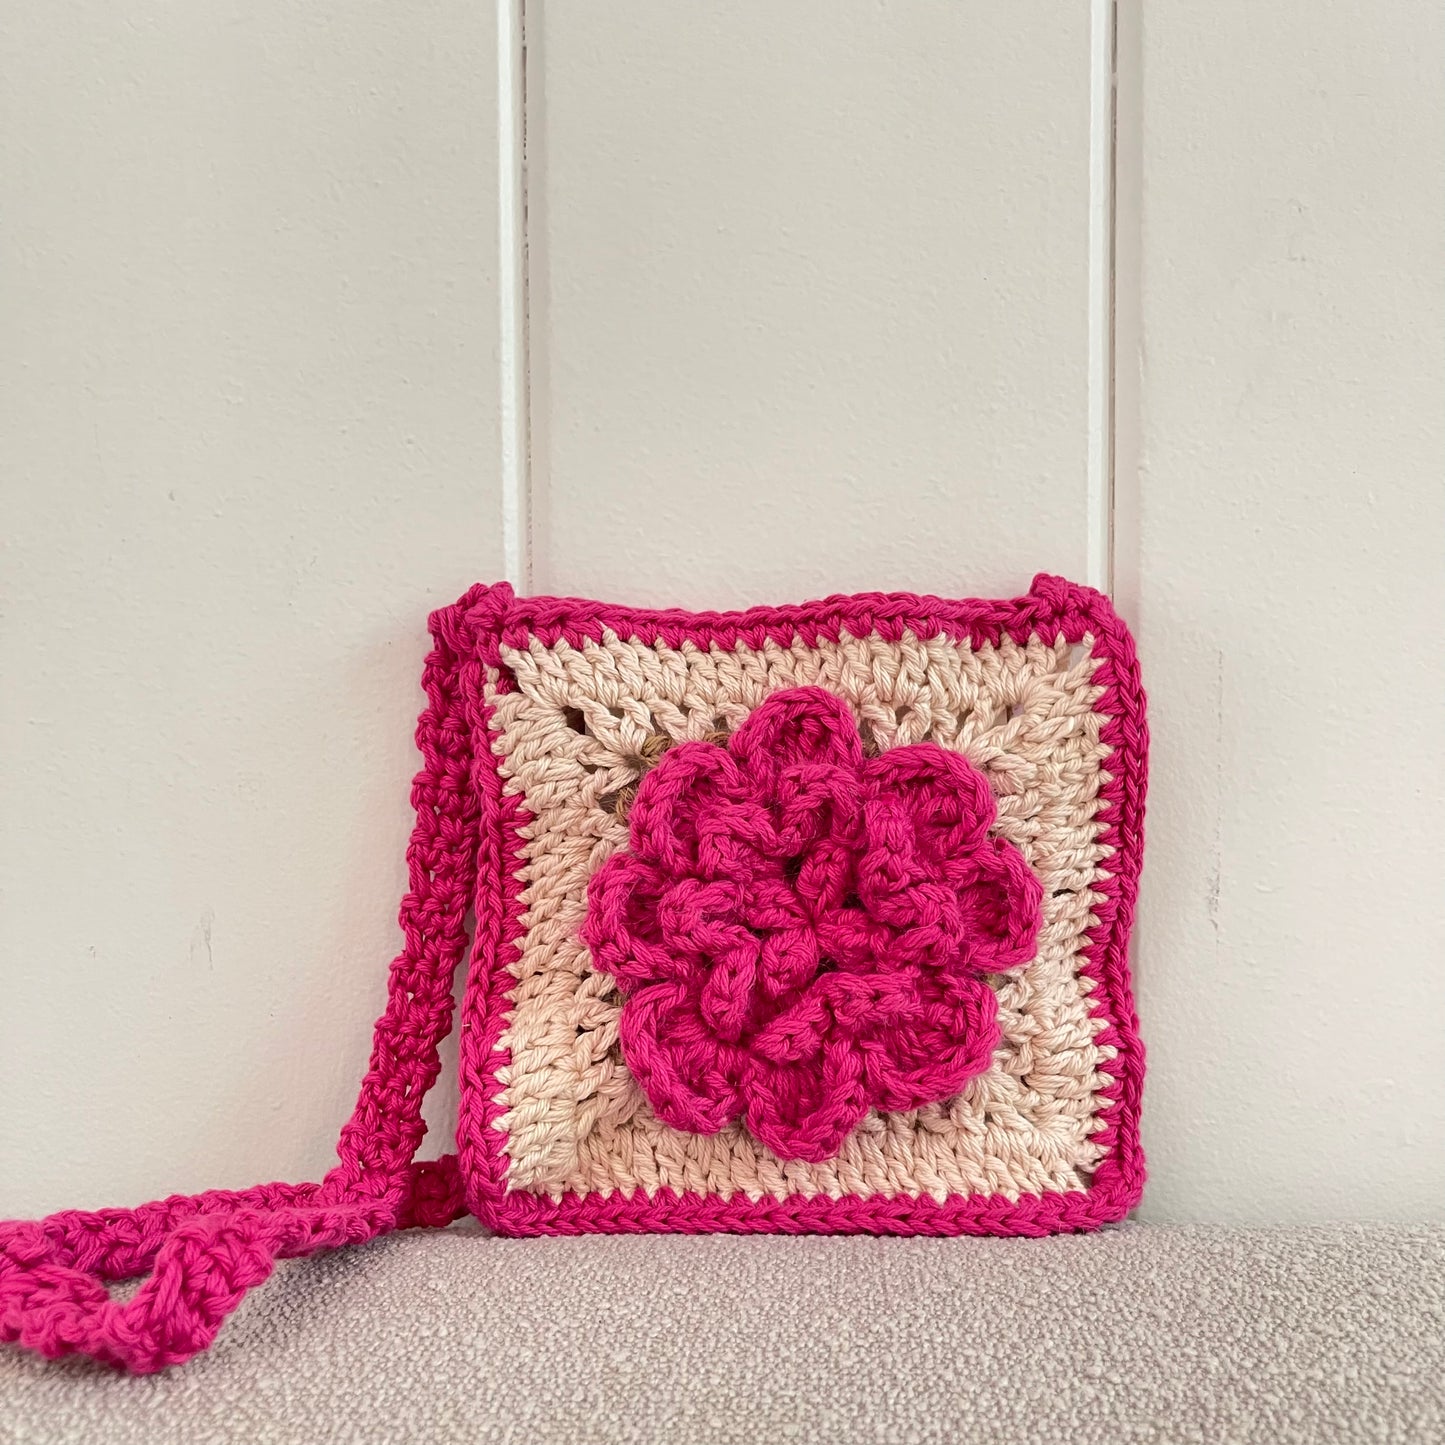 Crocheted granny square crossbody bag with a rose. The bag is pink and white. 